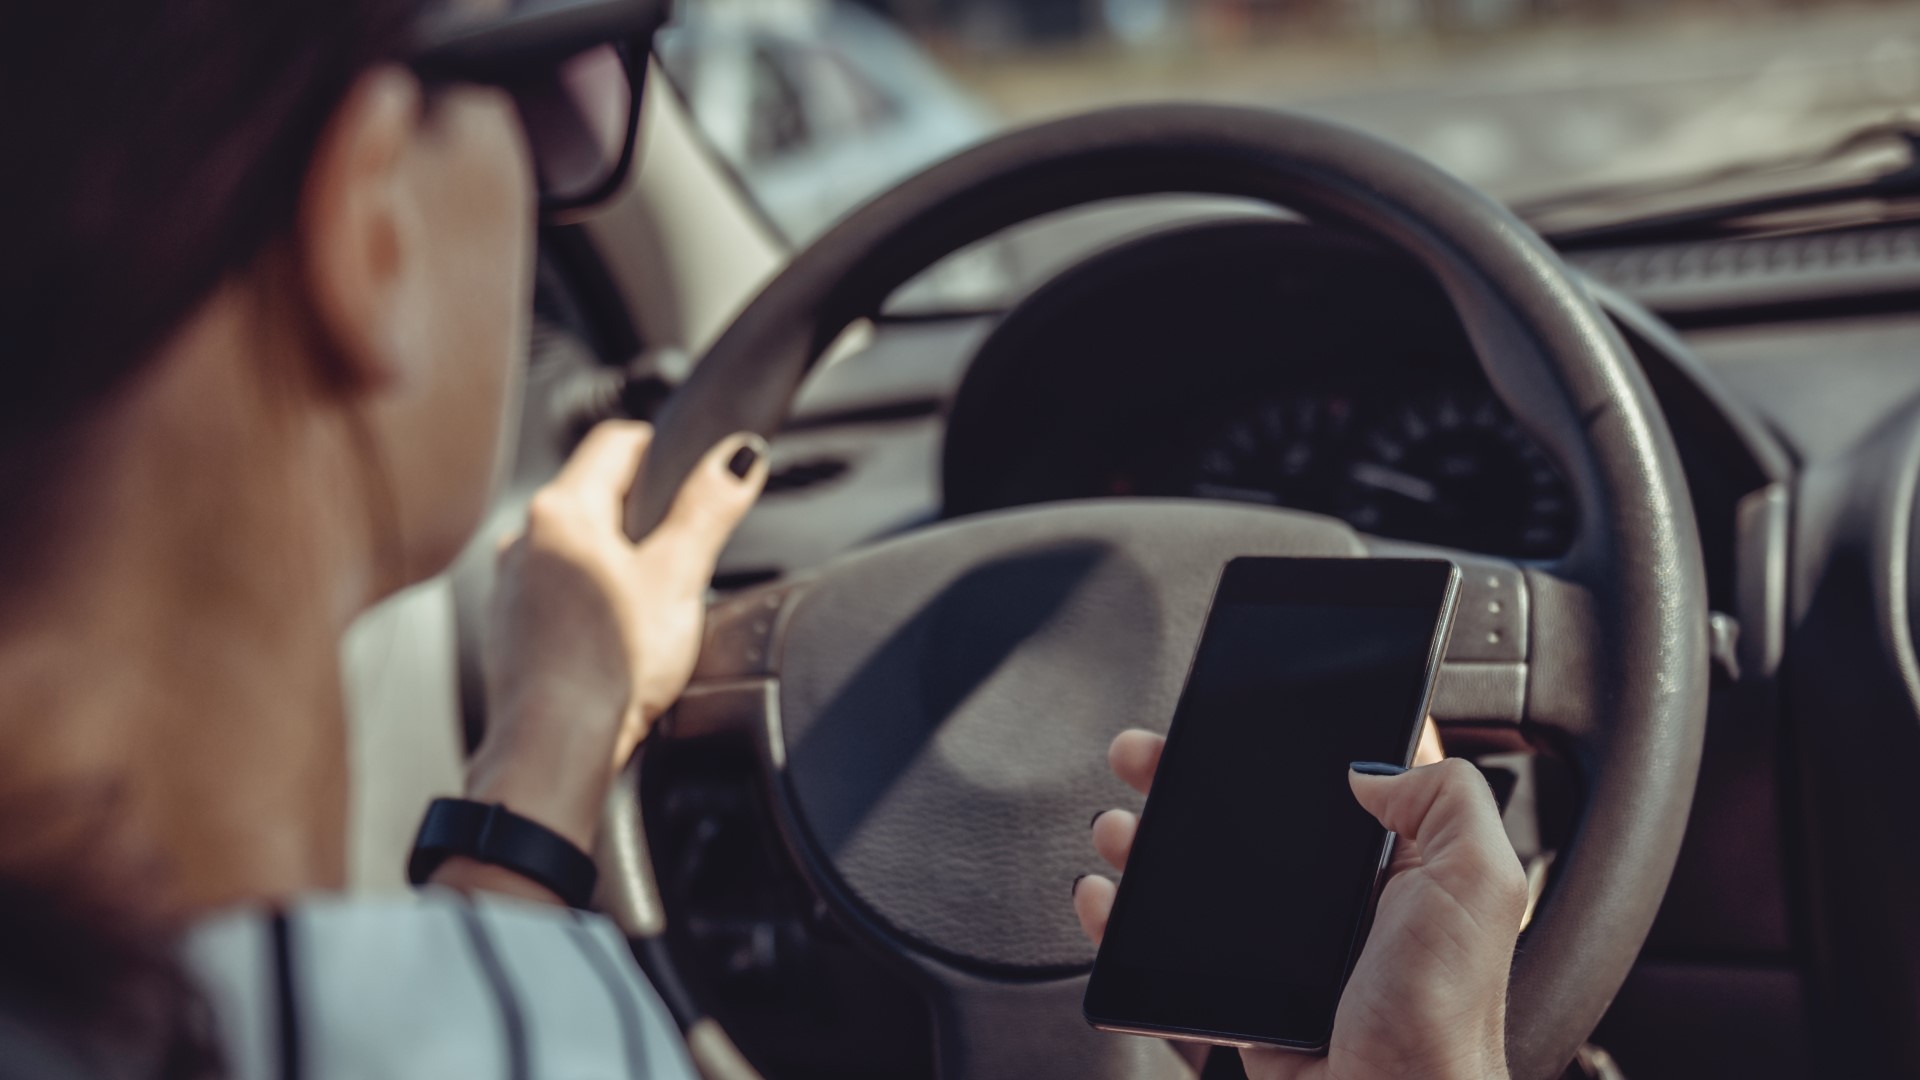 It could soon be illegal to hold your phone while driving in South Carolina, as lawmakers are expected to debate a hands-free driving bill.